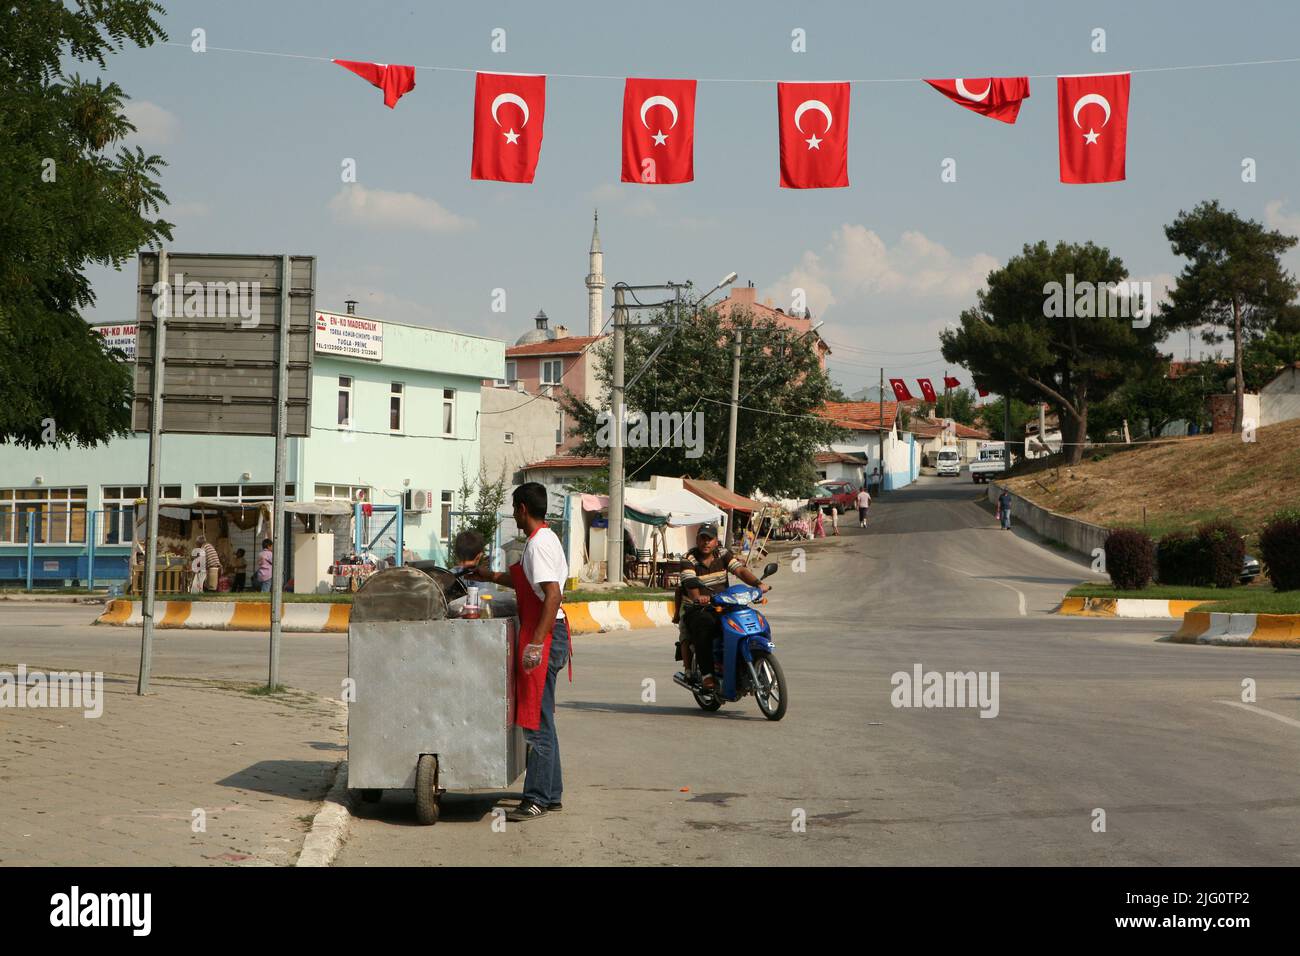 Street vendor on the street decorated with Turkish national flags in Edirne, Turkey. Stock Photo